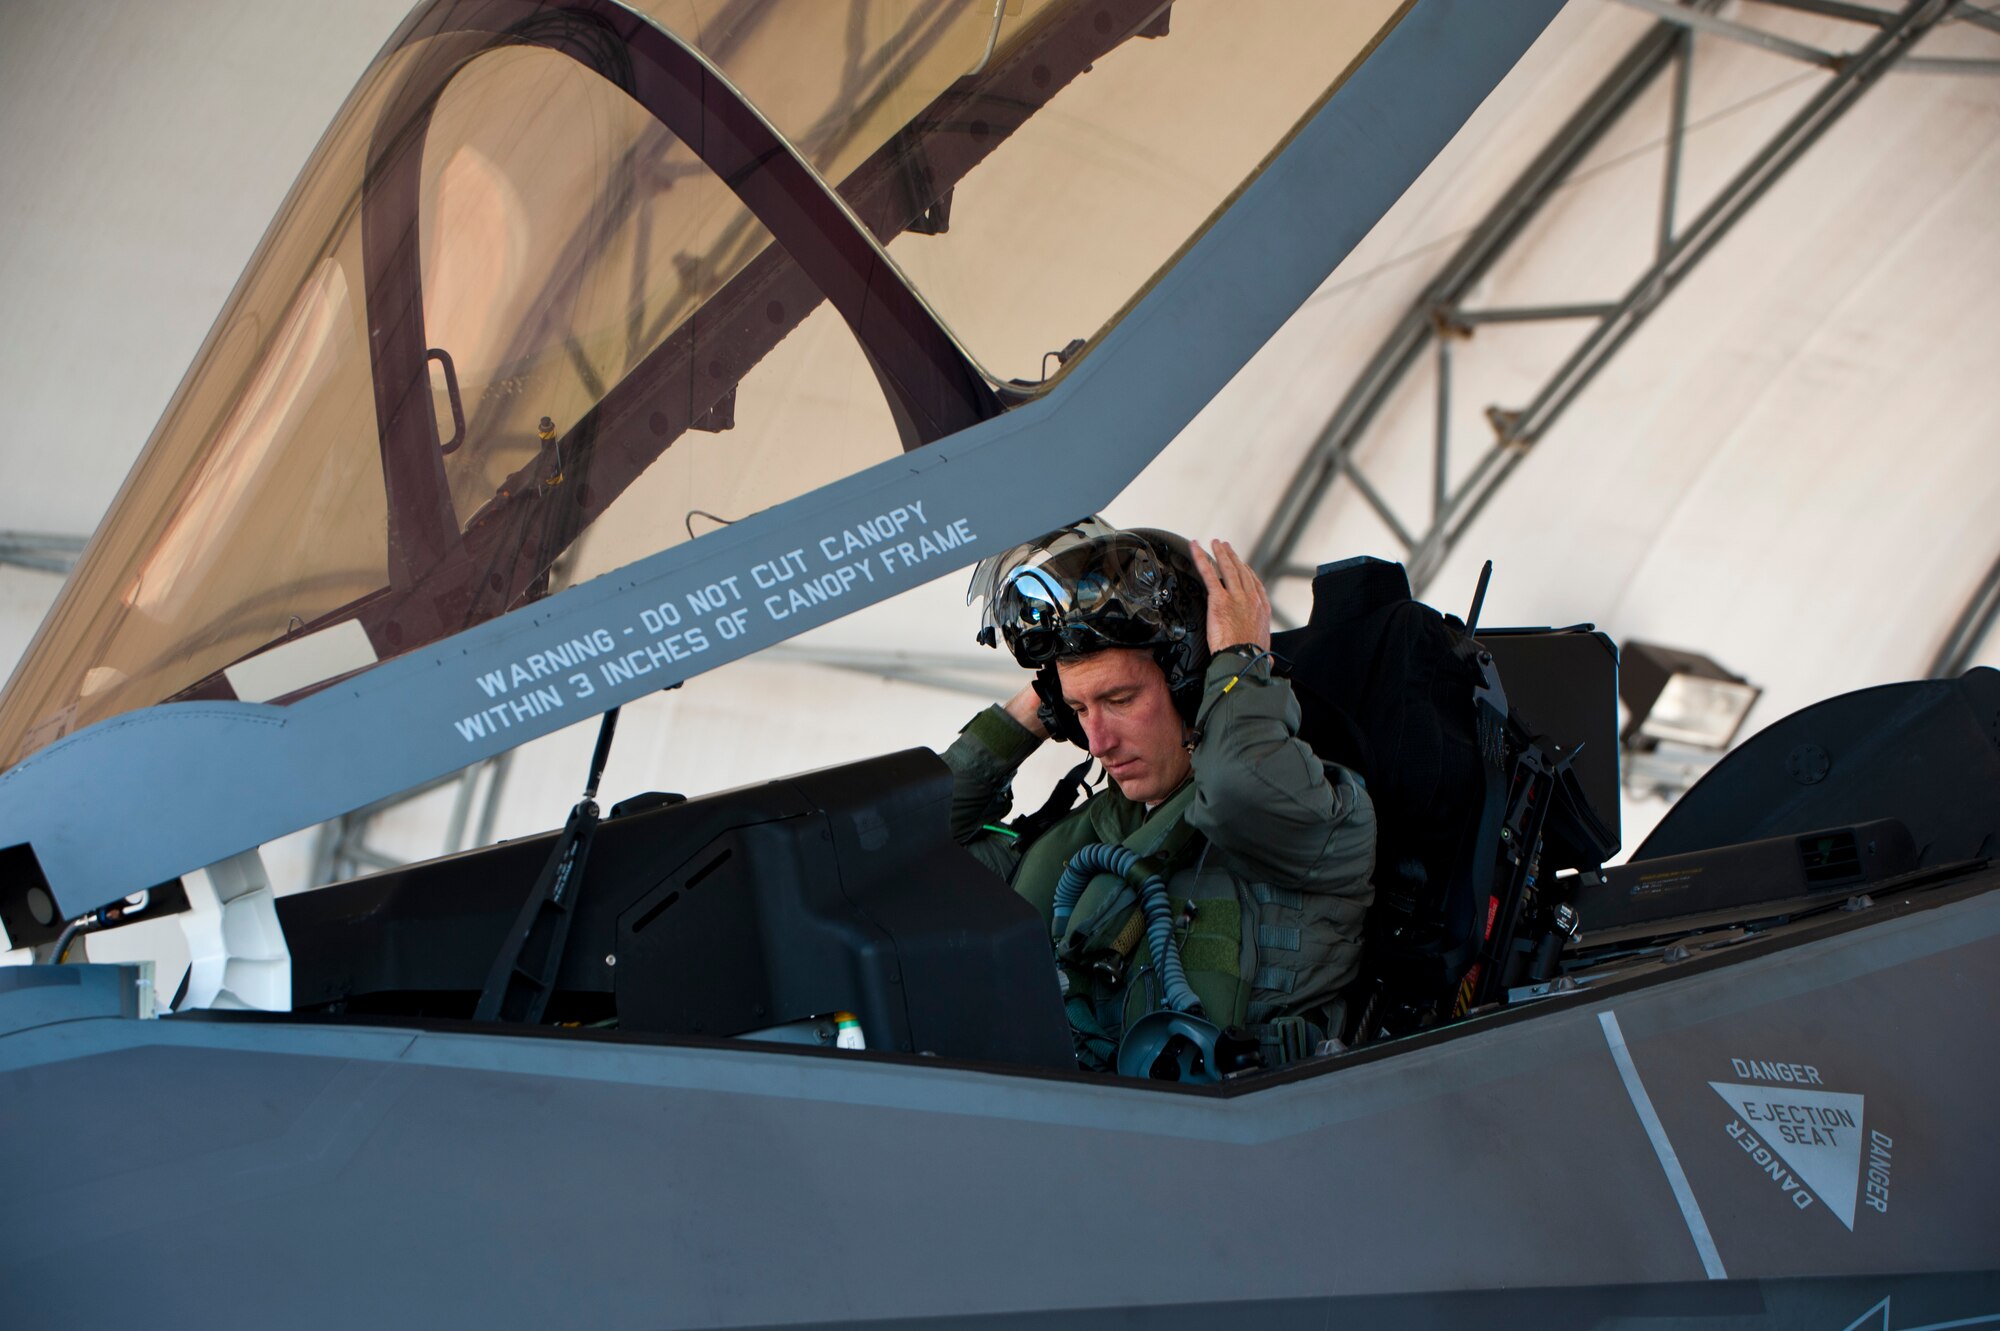 Lt. Col. George Watkins, incoming 34th Fighter Squadron commander, prepares to take off on a training mission from Eglin Air Force Base, Fla., June 4, 2015. (U.S. Air Force photo/Staff Sgt. Marleah Robertson)